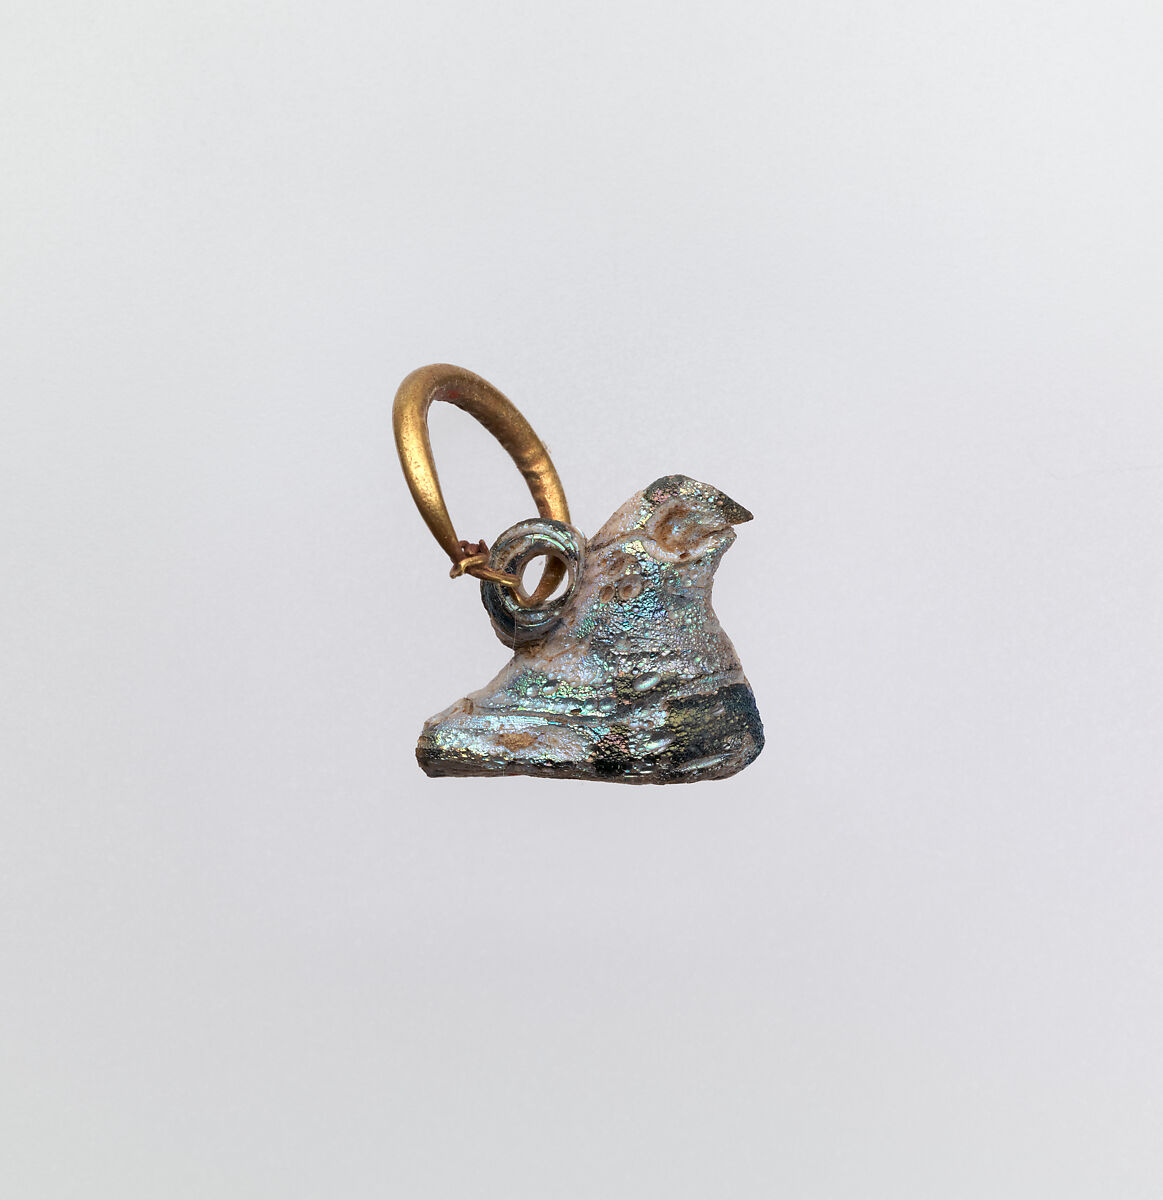 Gold earring with glass pendant in the form of a bird, Gold, glass, Phoenician 